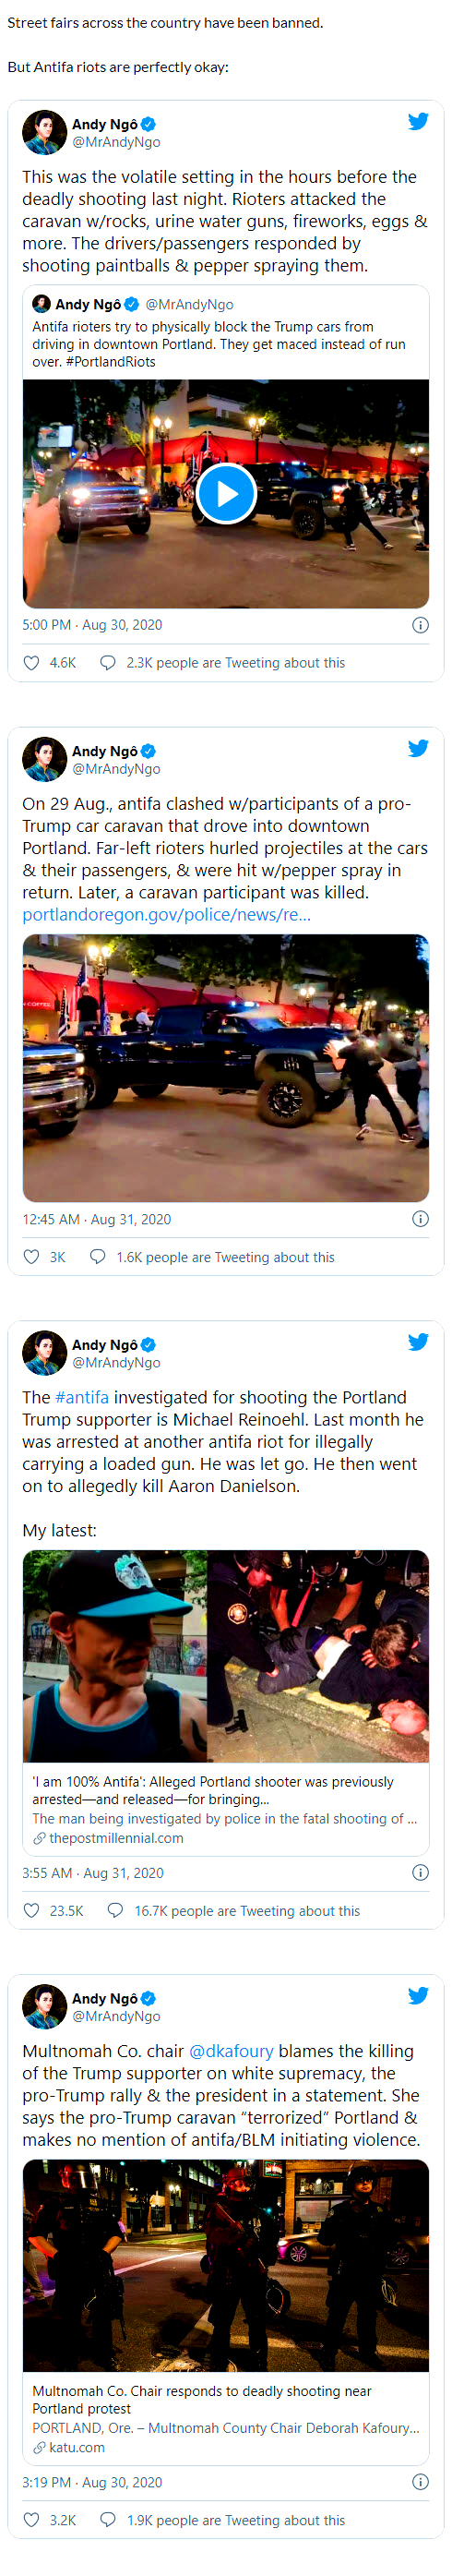 "Blames the killing of the Trump supporter on white supremacy, the pro-Trump rally & the president in a statement. She says the pro-Trump caravan “terrorized” Portland & makes no mention of antifa/BLM initiating violence." - Winds Of Jihad 